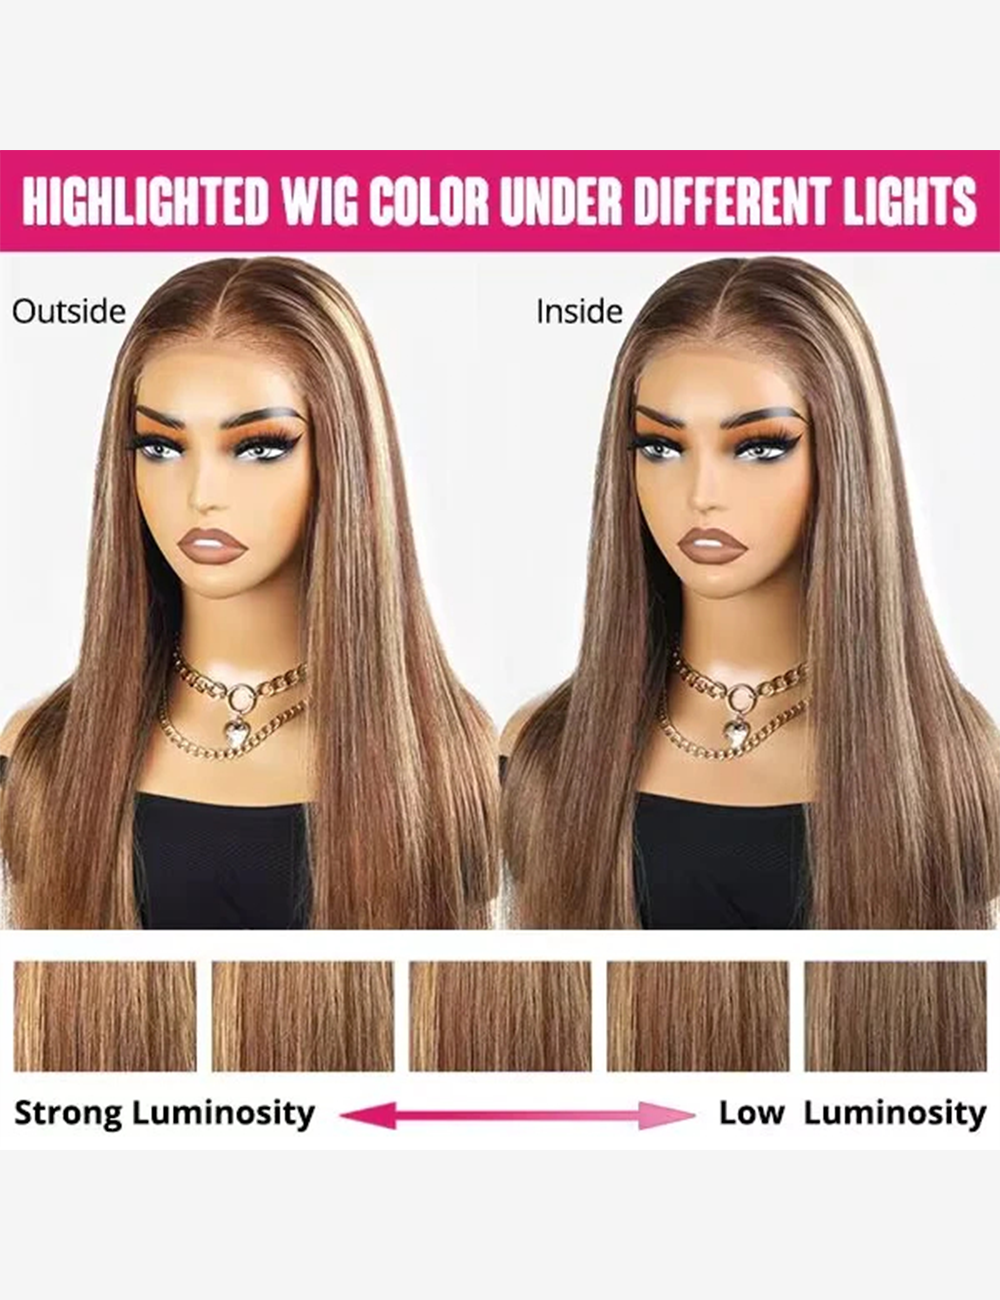 Invisible Knots Deep Wave Wig P4/27 Highlights Wigs Lace Closure Wigs Human Hair Pre Cut Wigs